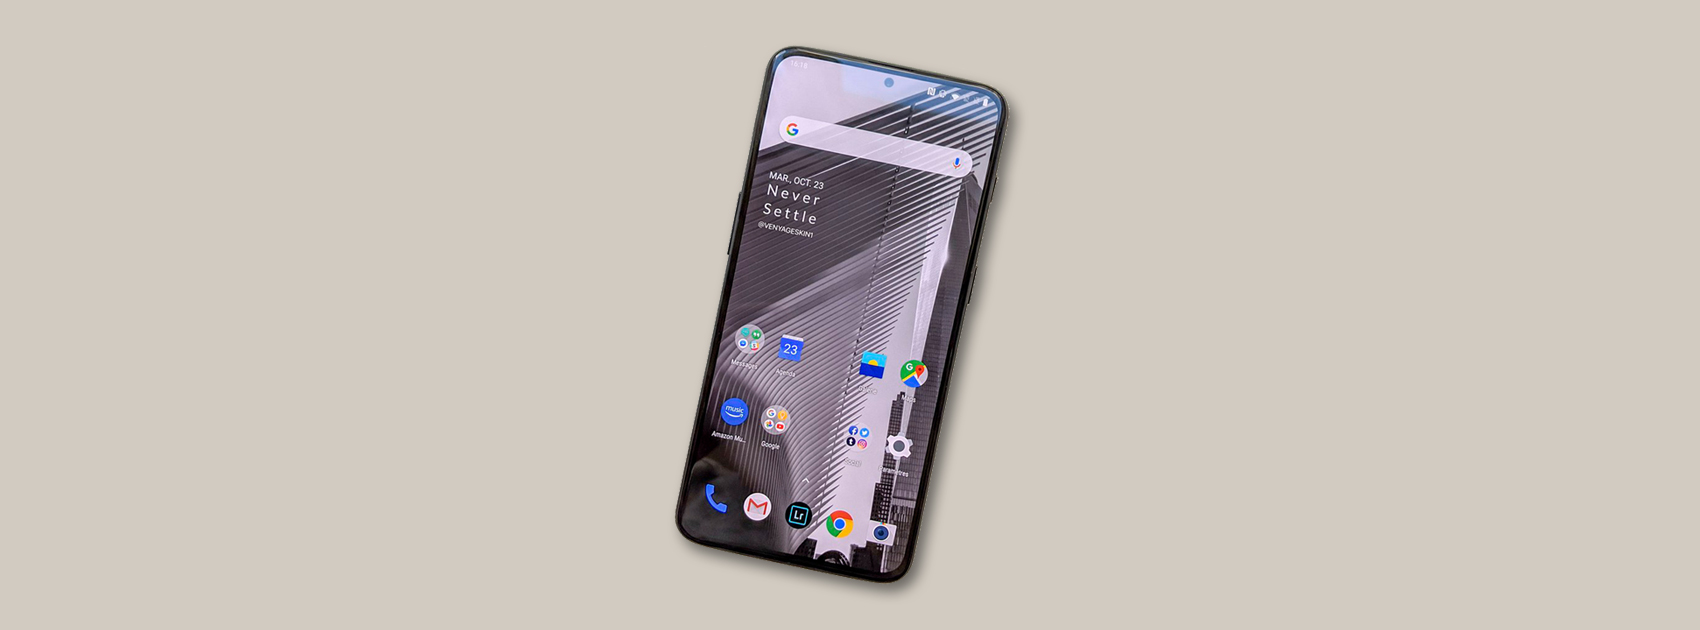 OnePlus 7 And Everything You Can Expect,Startup Stories,Technology News 2019,OnePlus 7 Specification,OnePlus 7 Price in India Launch Date,OnePlus 7 Features,Brand New OnePlus 7,OnePlus 7 Latest News,New OnePlus 7 Phone Features,OnePlus 7 Price